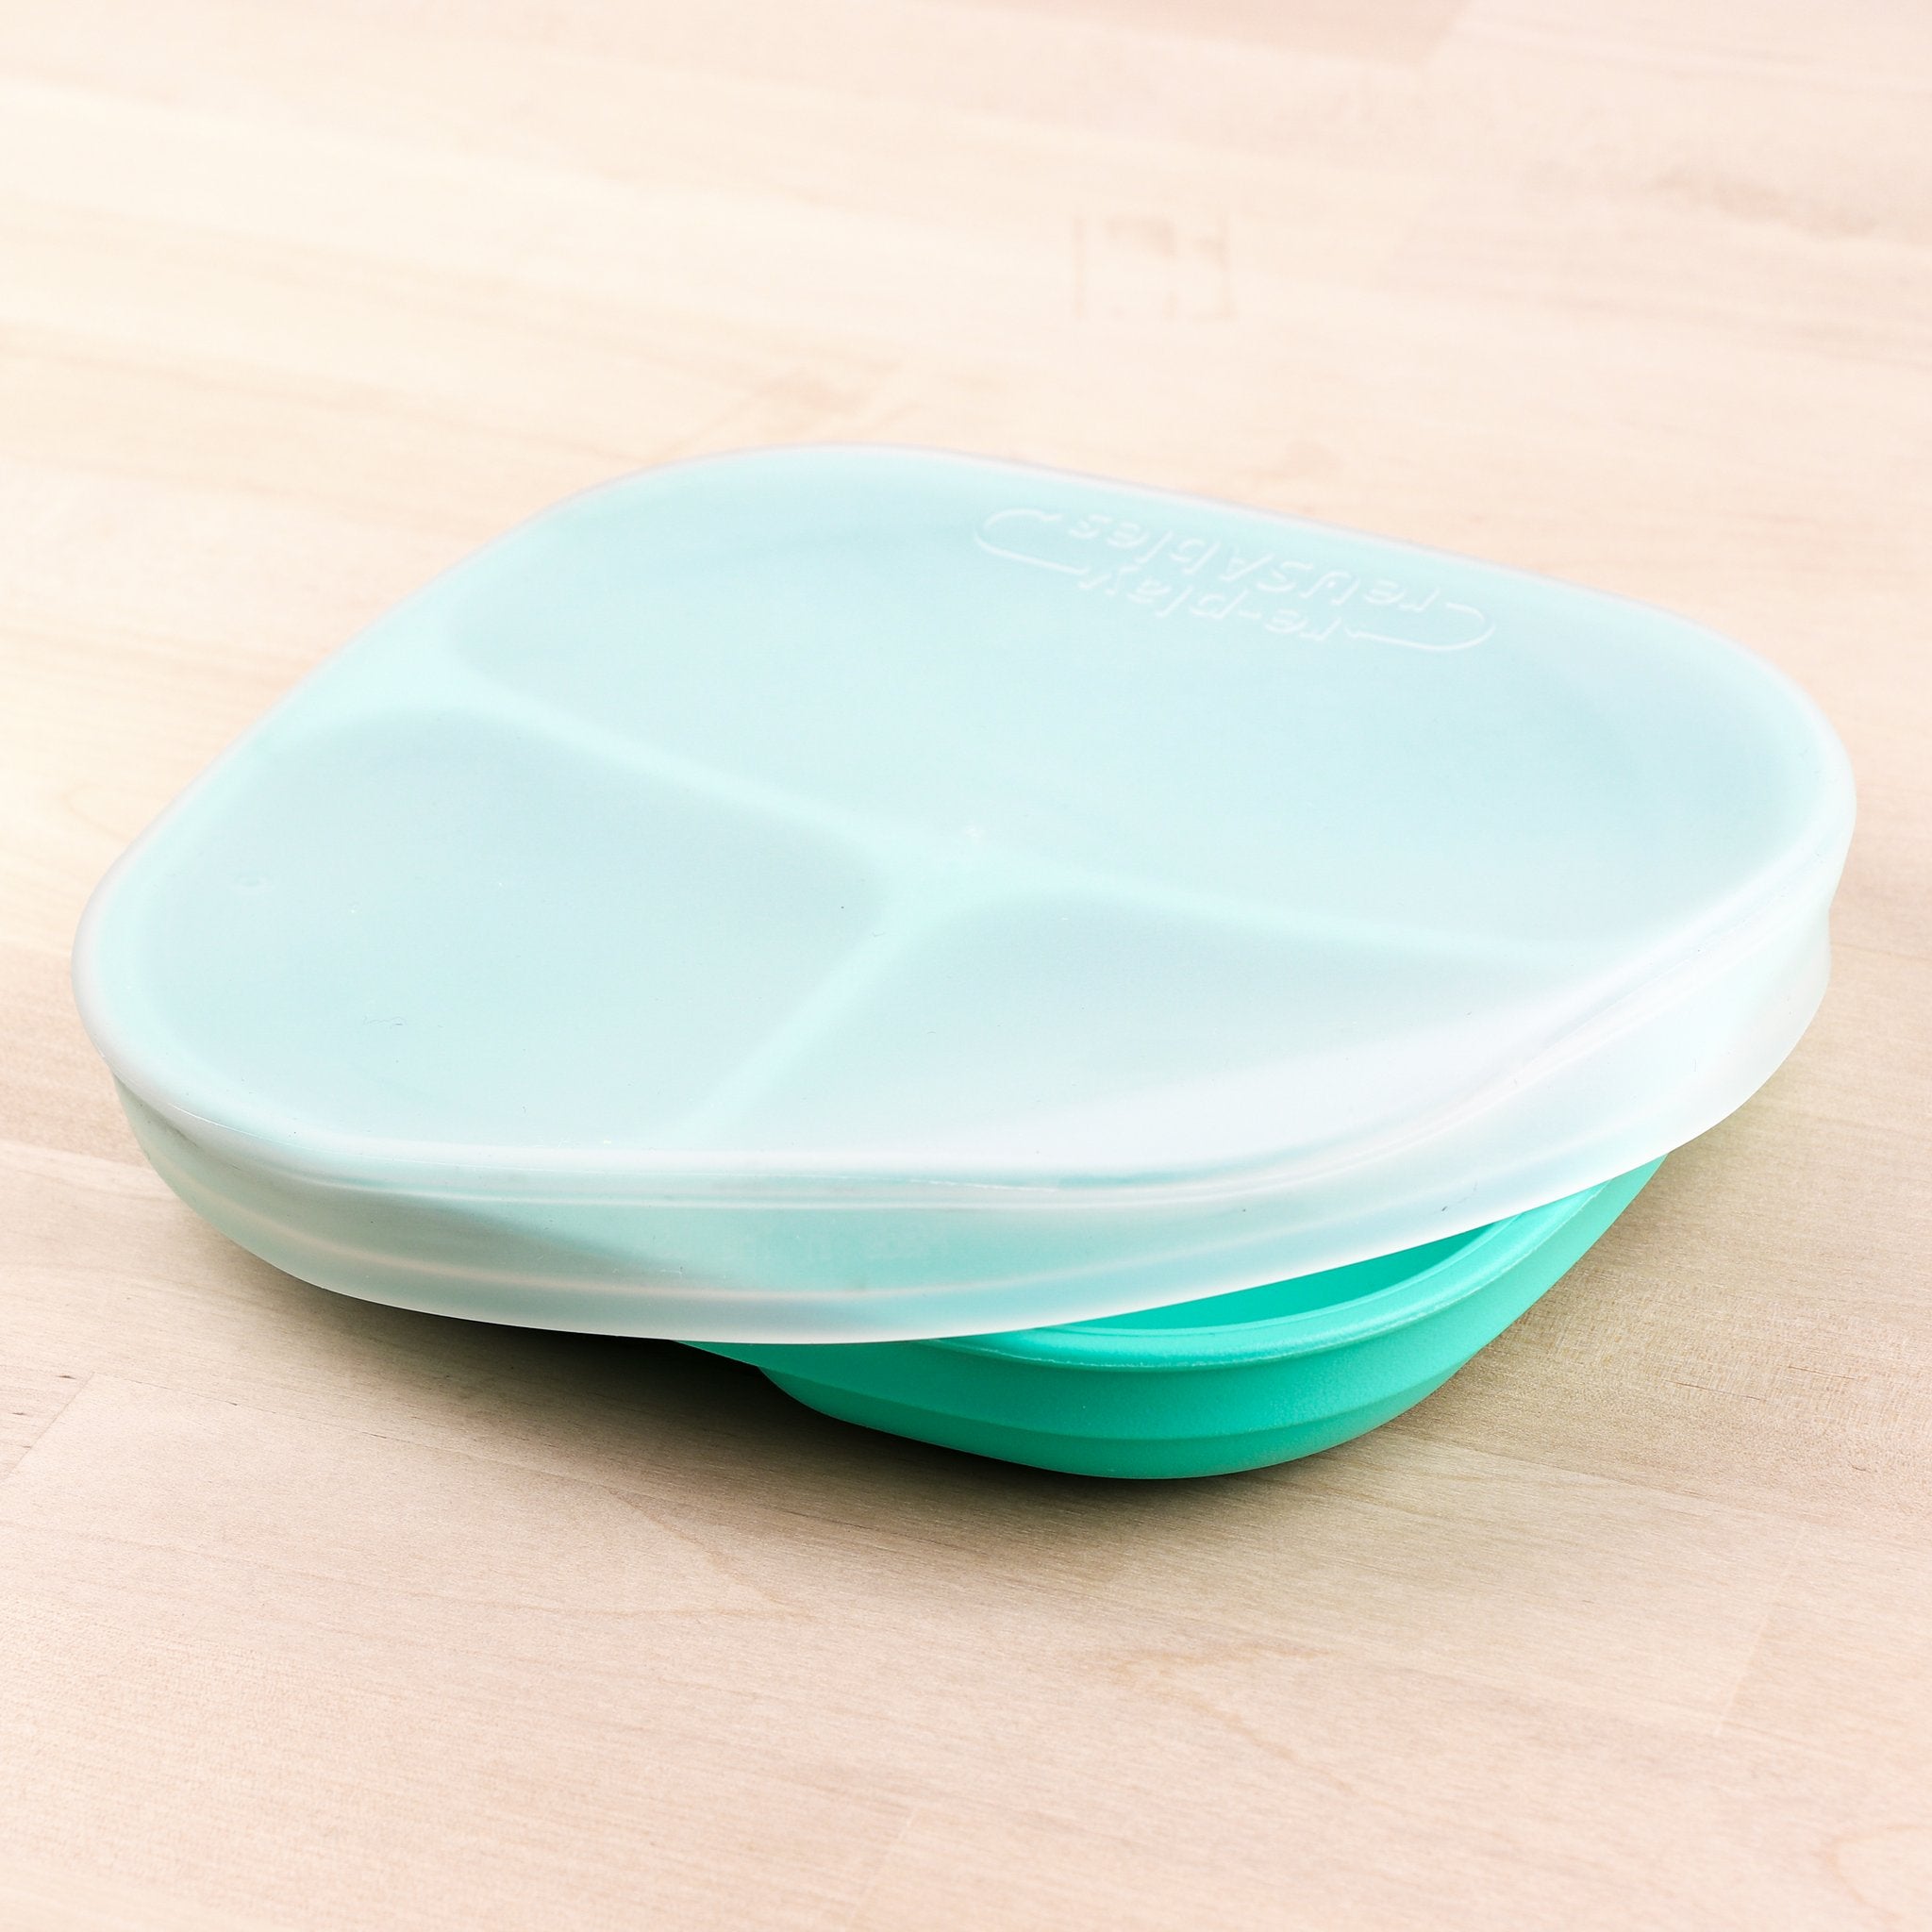 Re-play Silicone Lid-The Living Co.